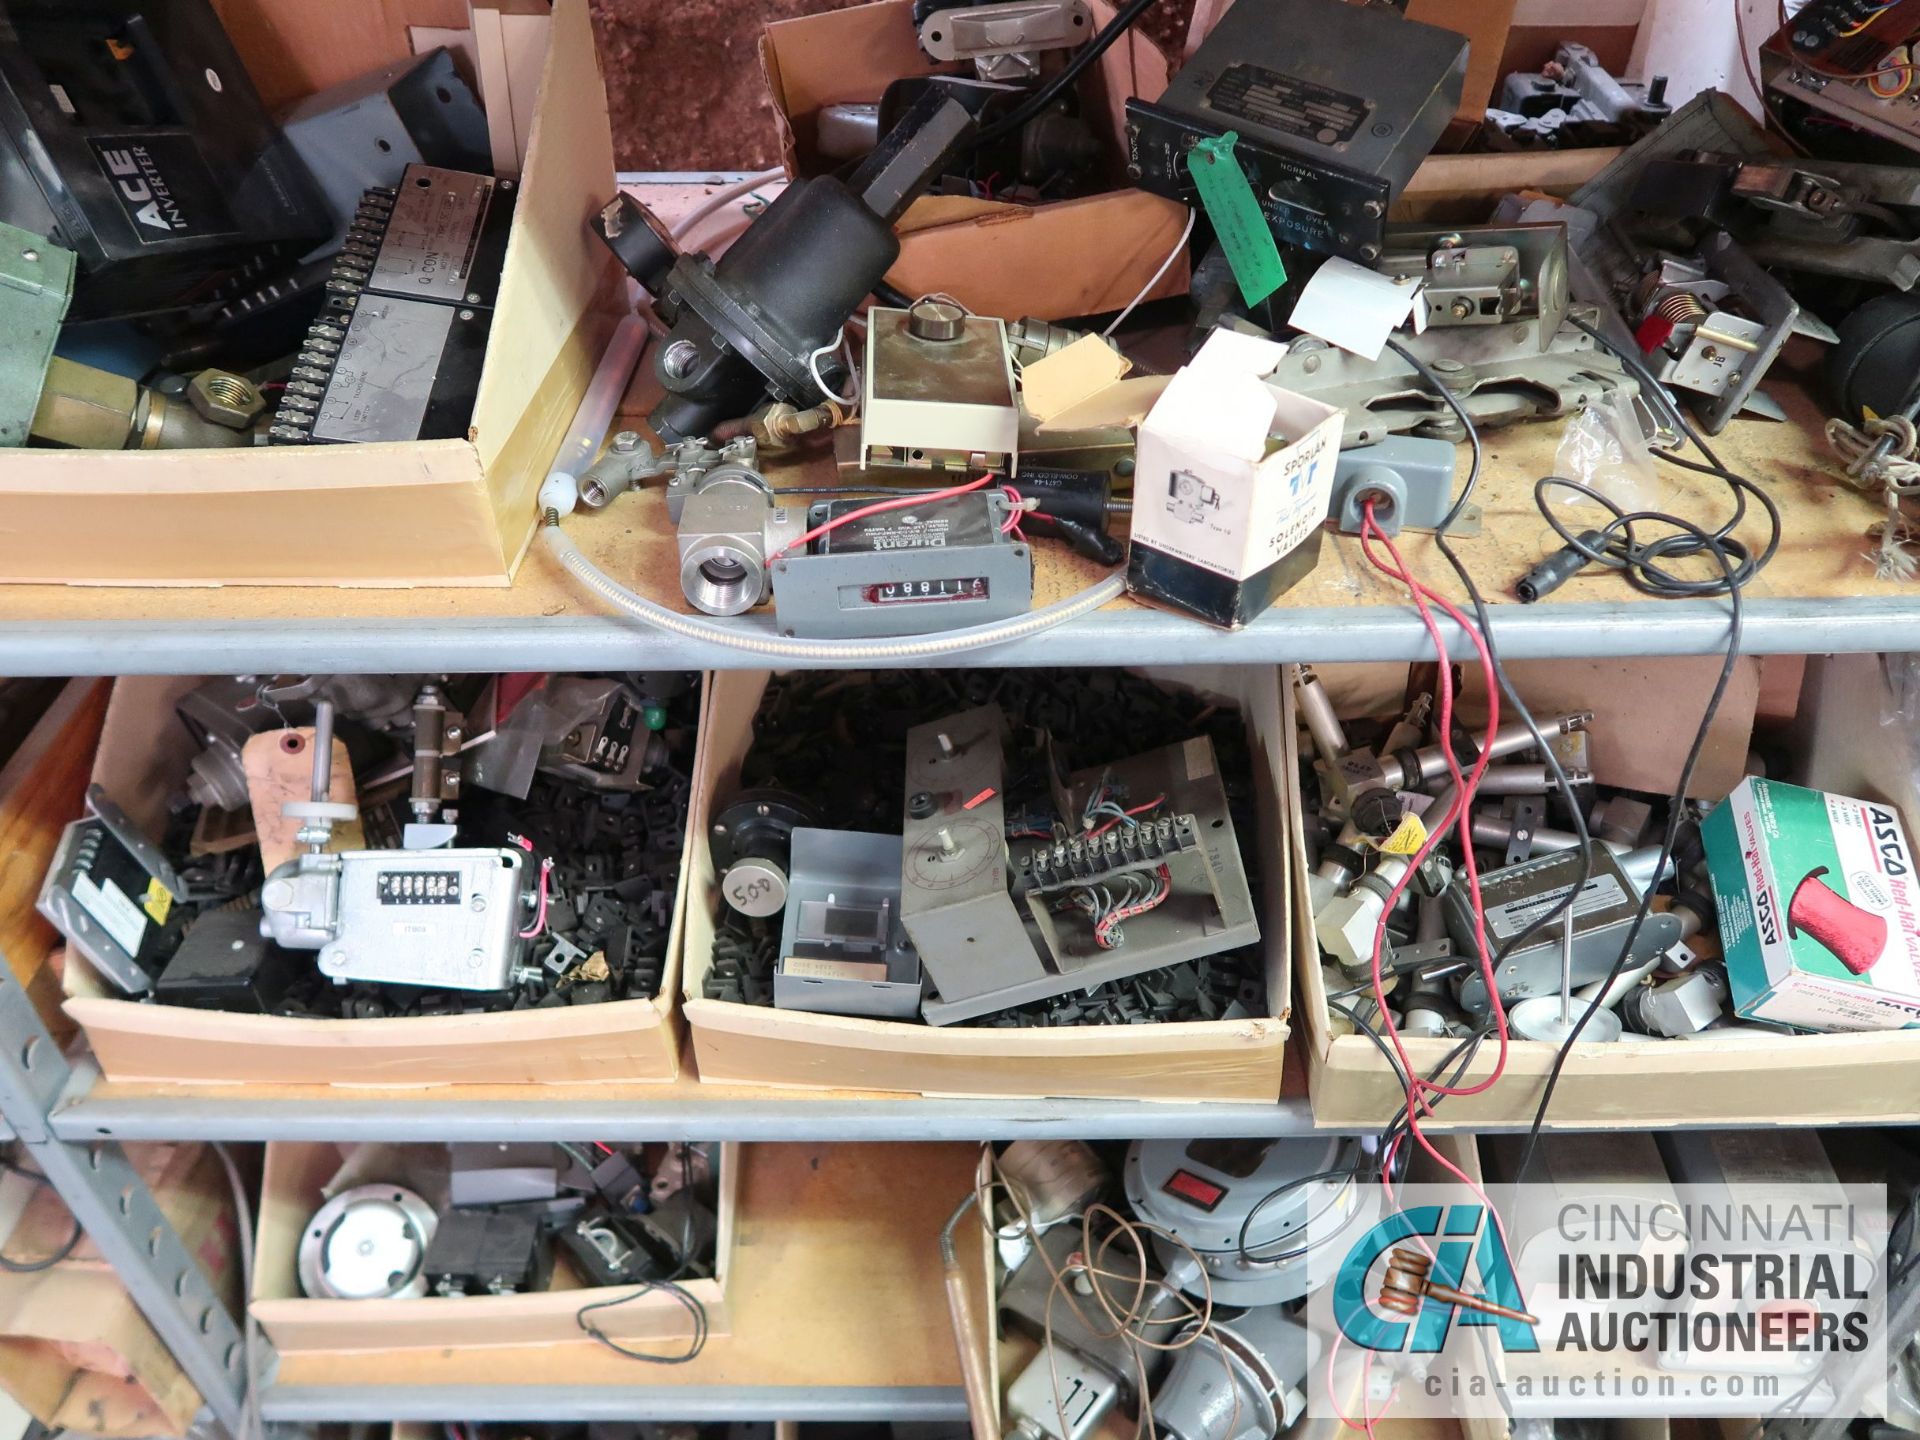 CONTENTS OF (16) SHELVES INCLUDING MISCELLANEOUS VALVES, THERMOSTATS, ANALYZERS, ELECTRICAL, CONTROL - Image 10 of 47